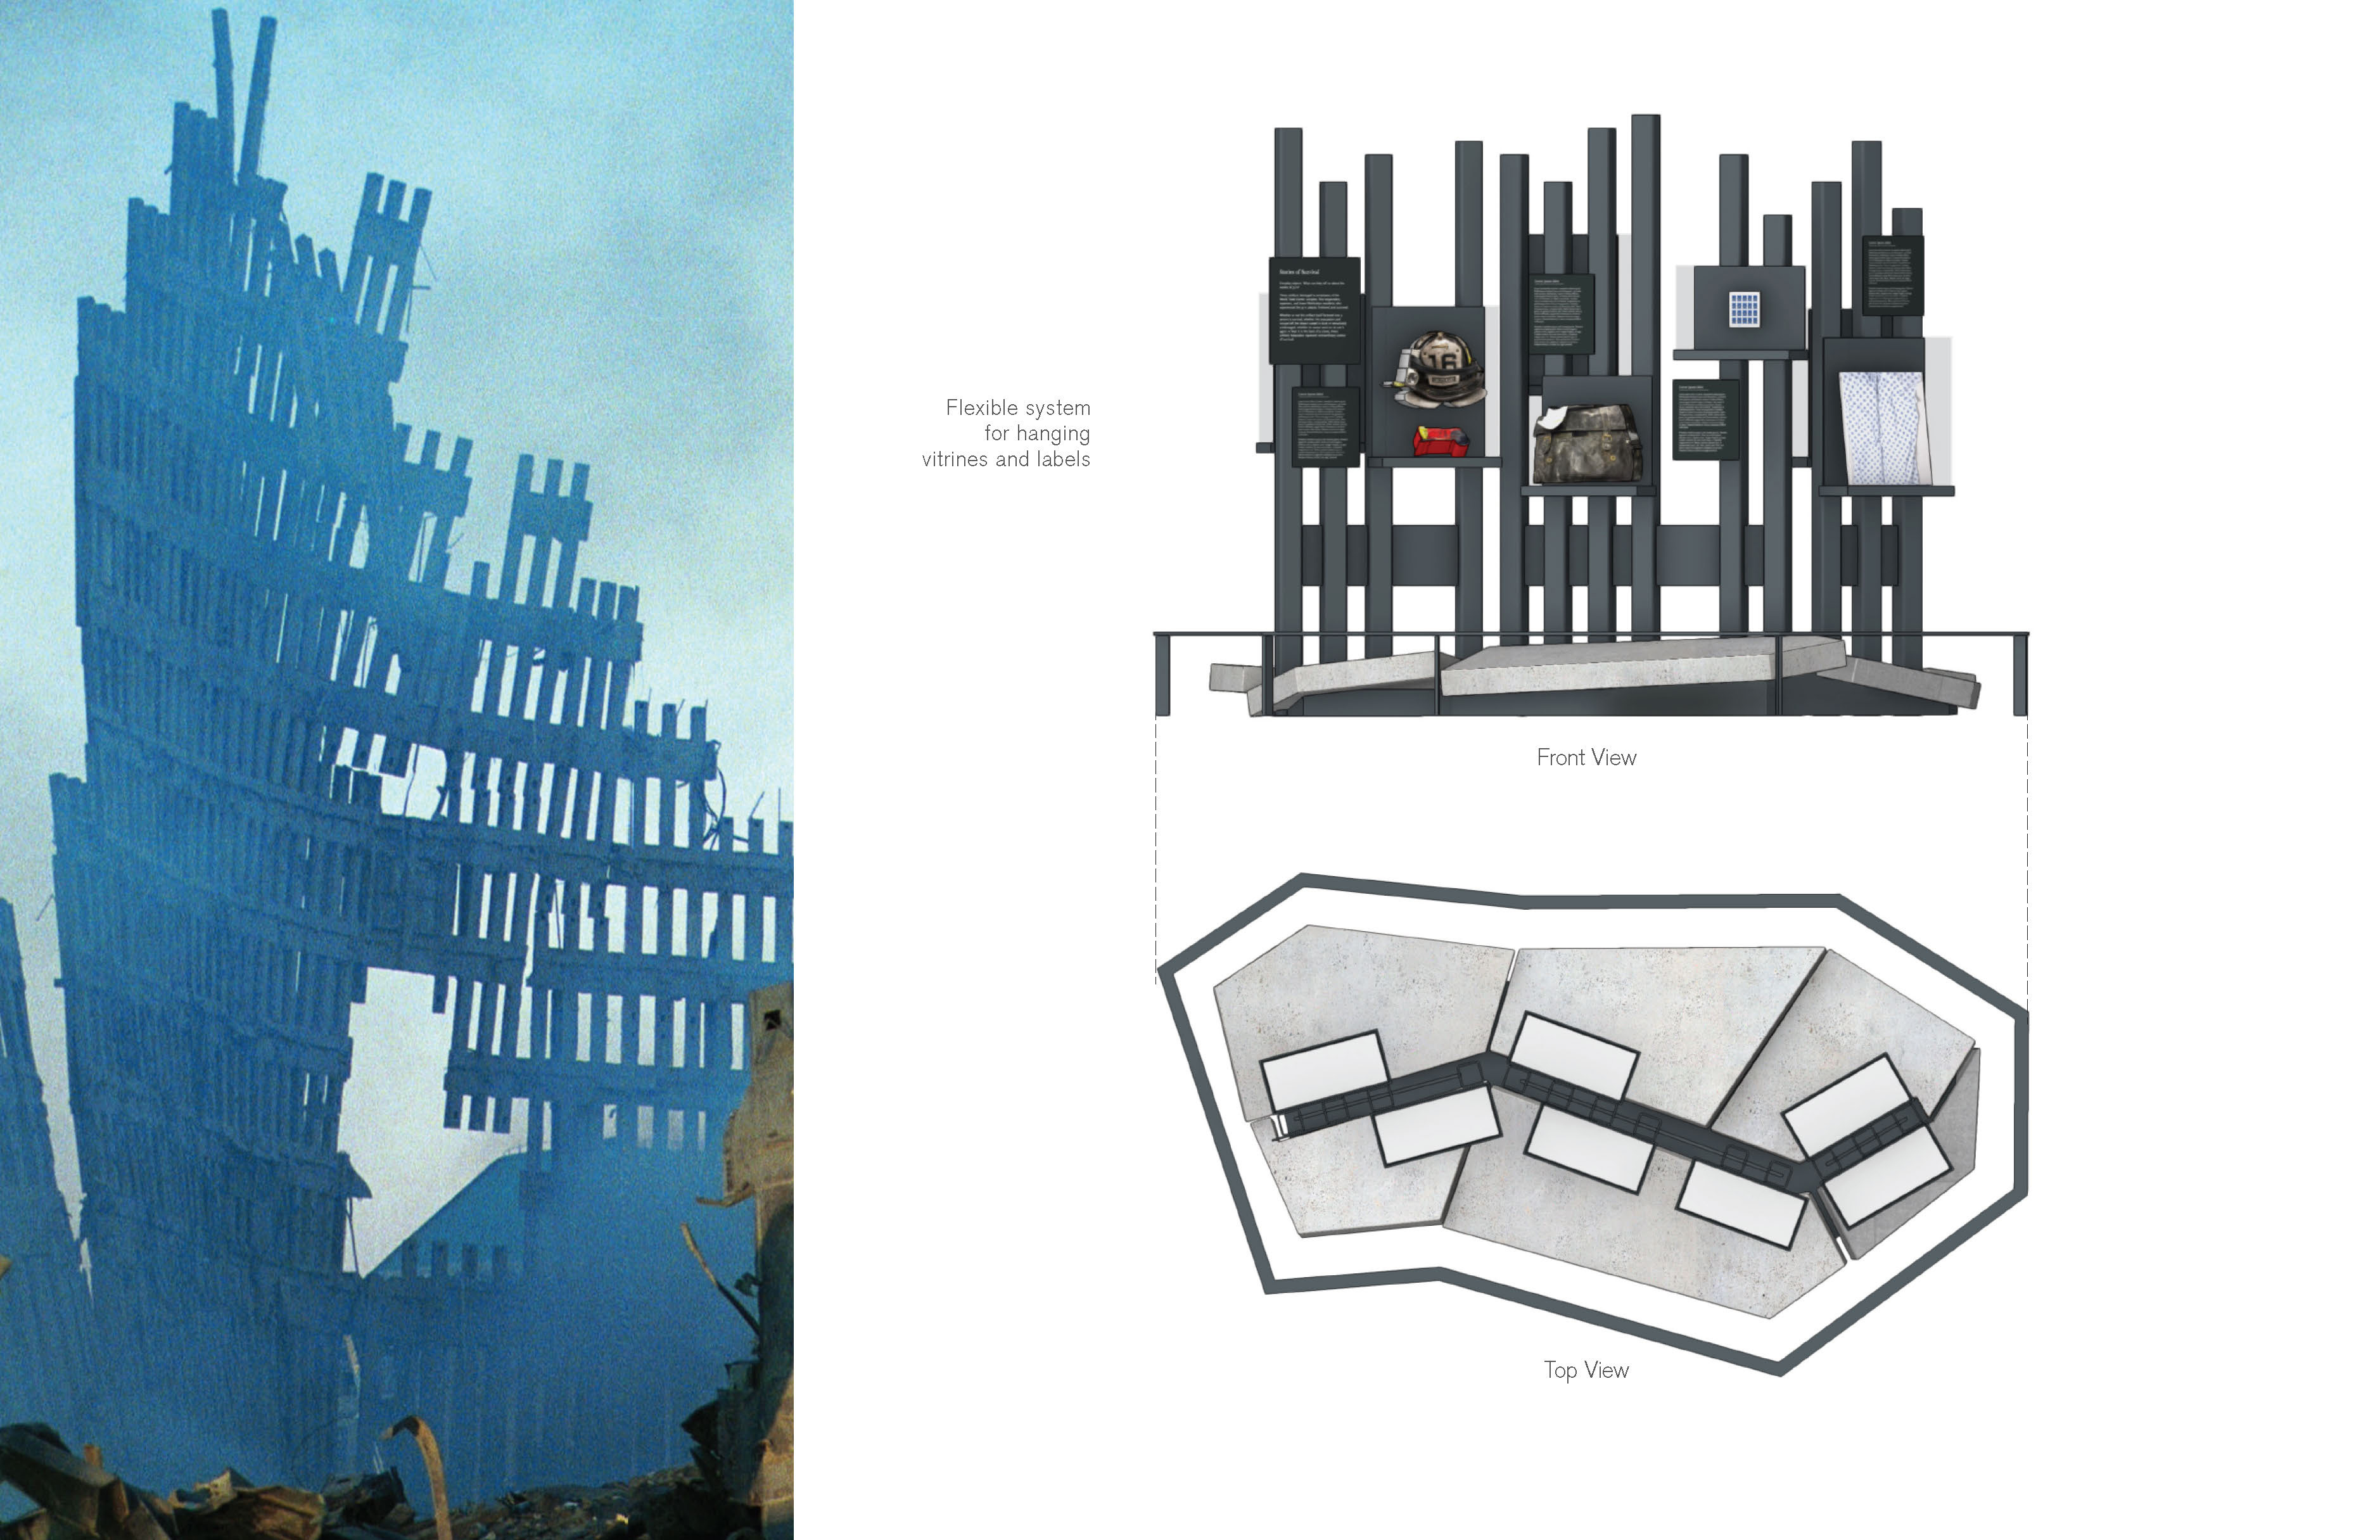 Schematic drawings for the layout of the Tribute Art Space at the September 11th Museum